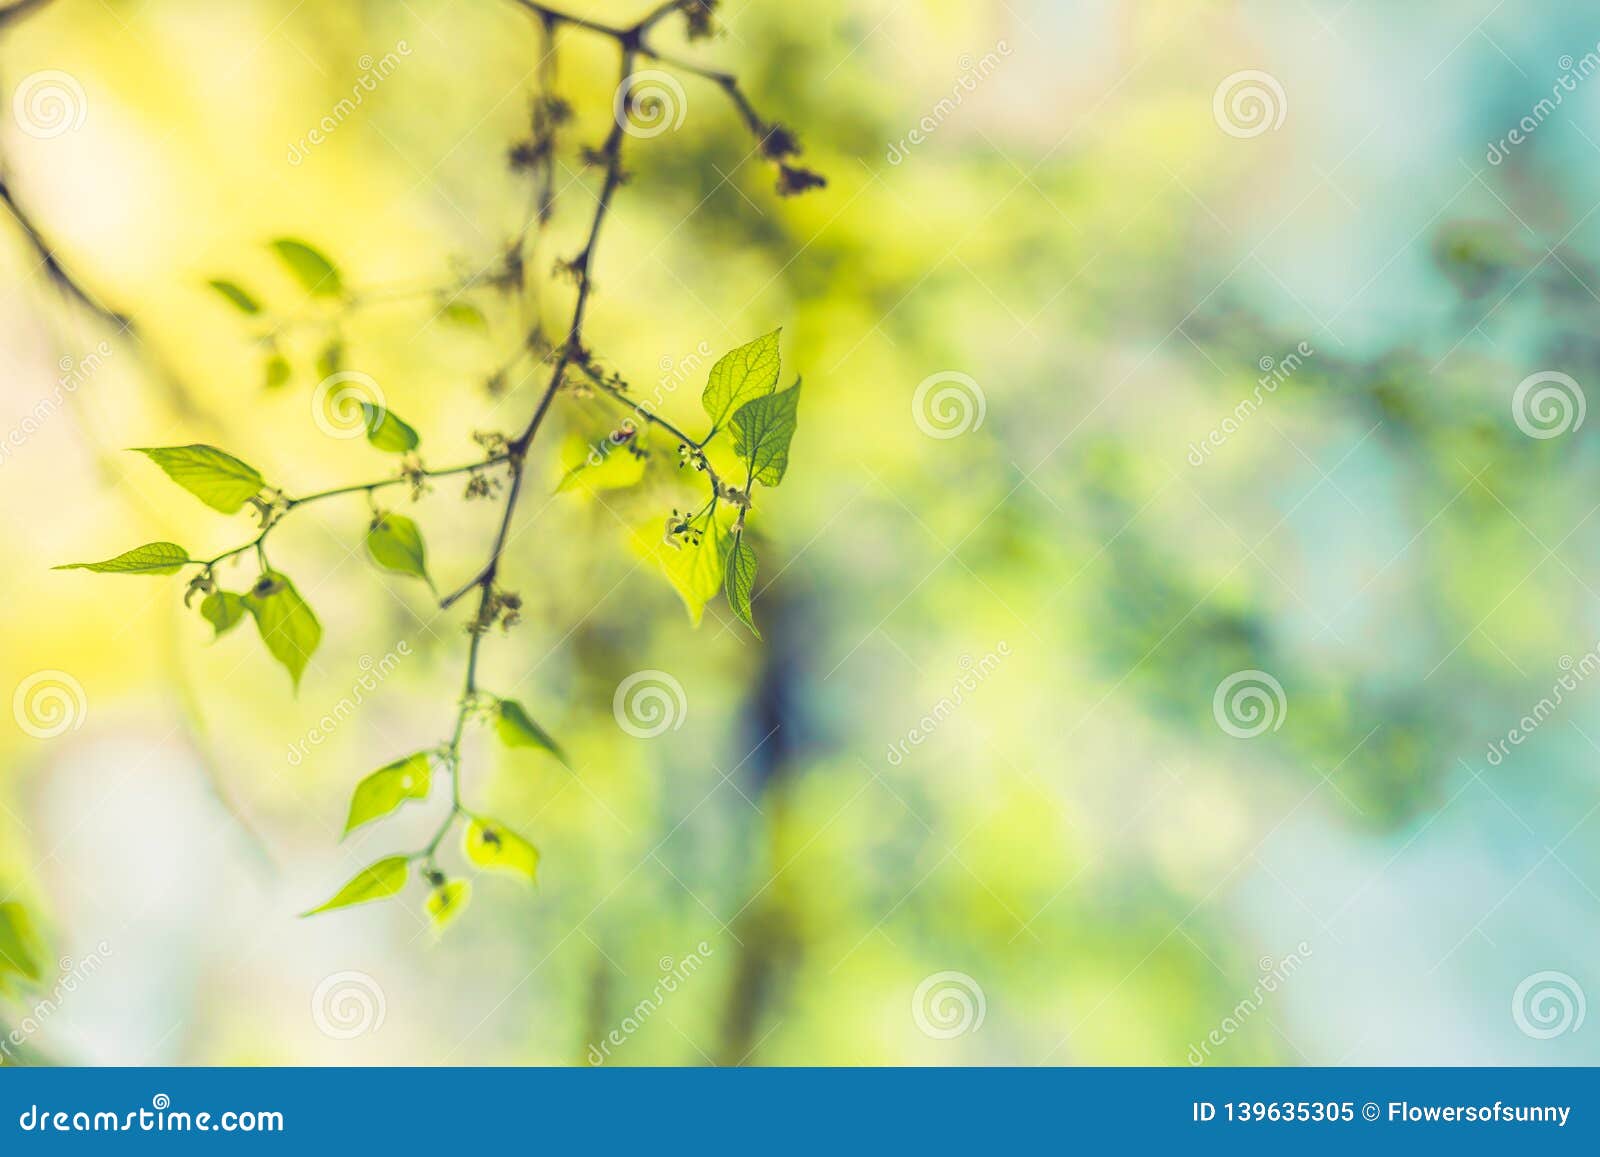 Fresh and Green Leaves. Nature Background, Freshness and New Life Nature  Concept Stock Image - Image of design, bokeh: 139635305